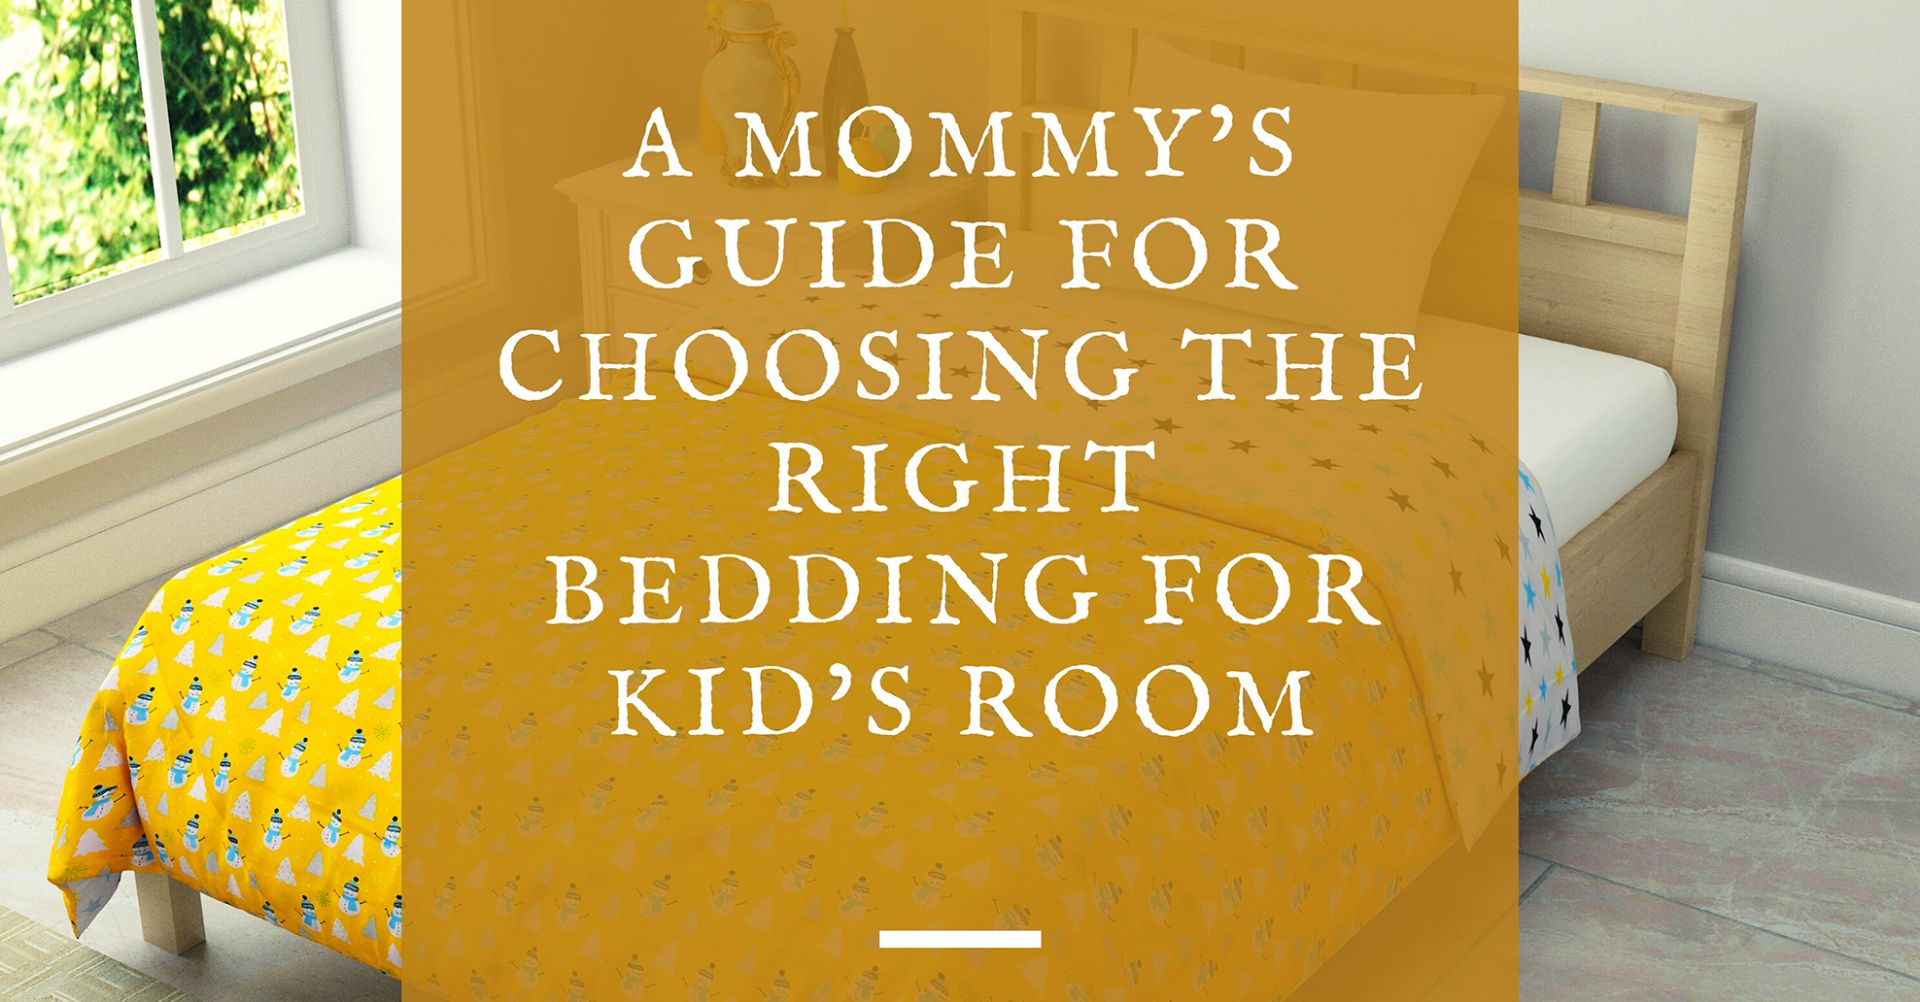 Right Bedding for Kid’s Room